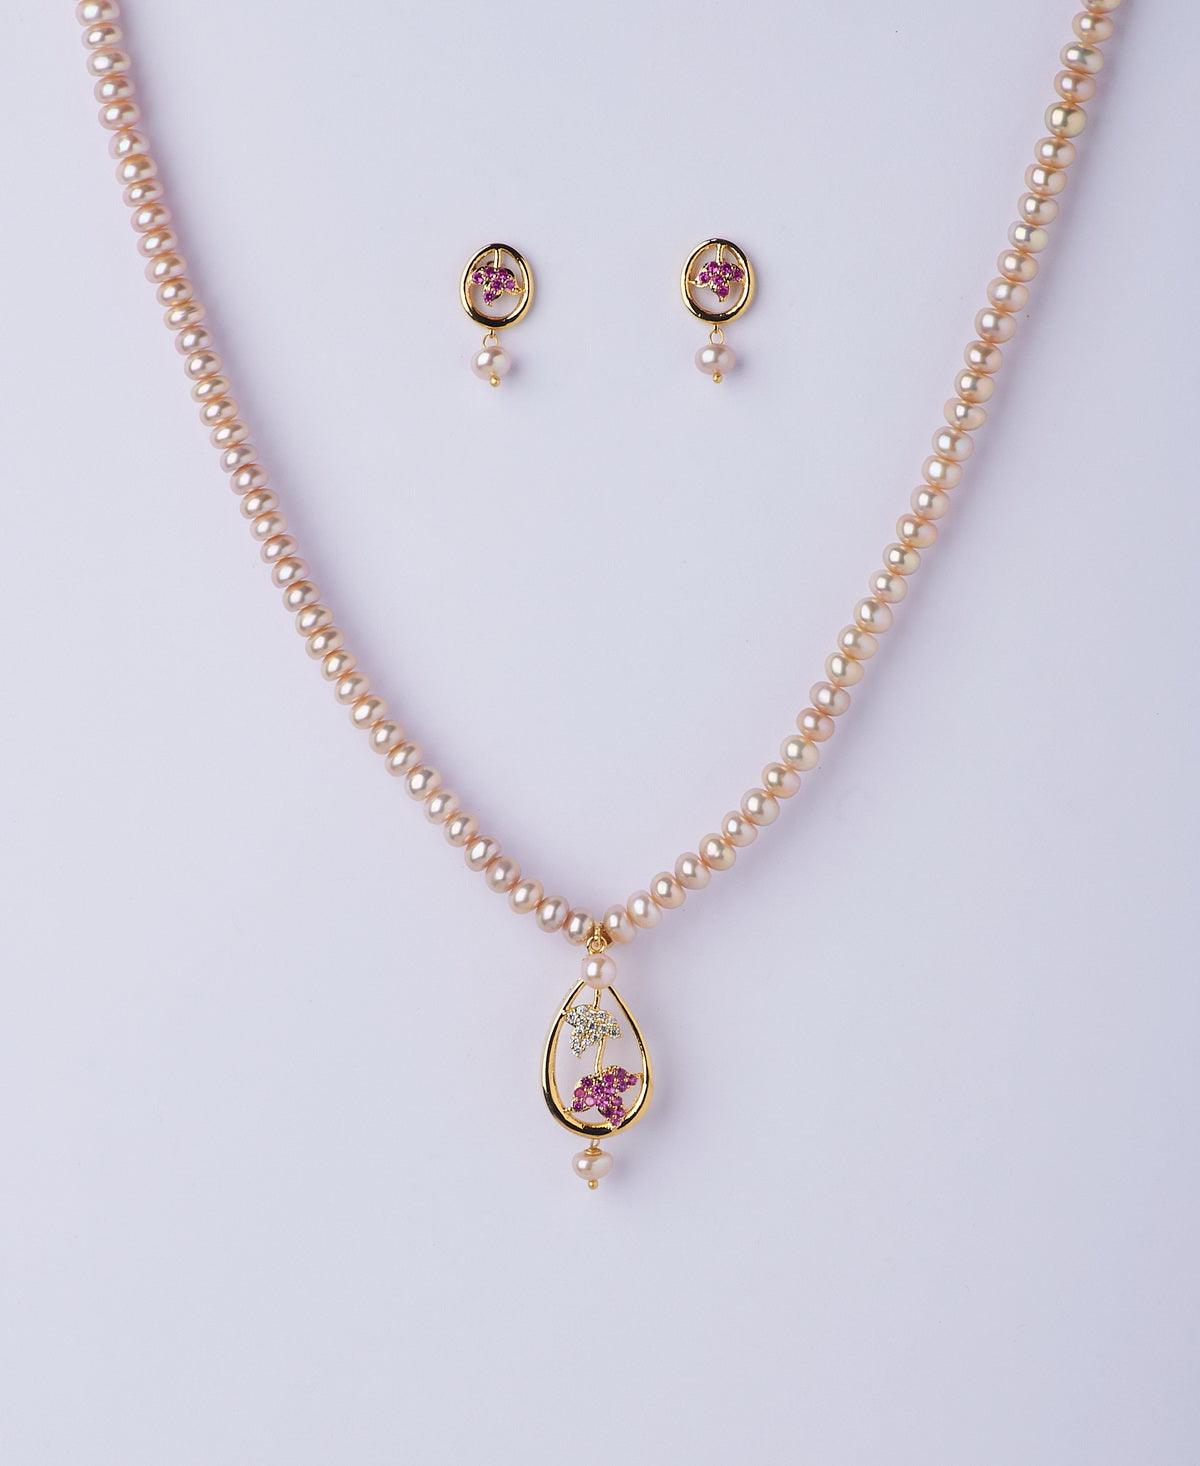 Pretty Real Pearl Necklace Set - Chandrani Pearls